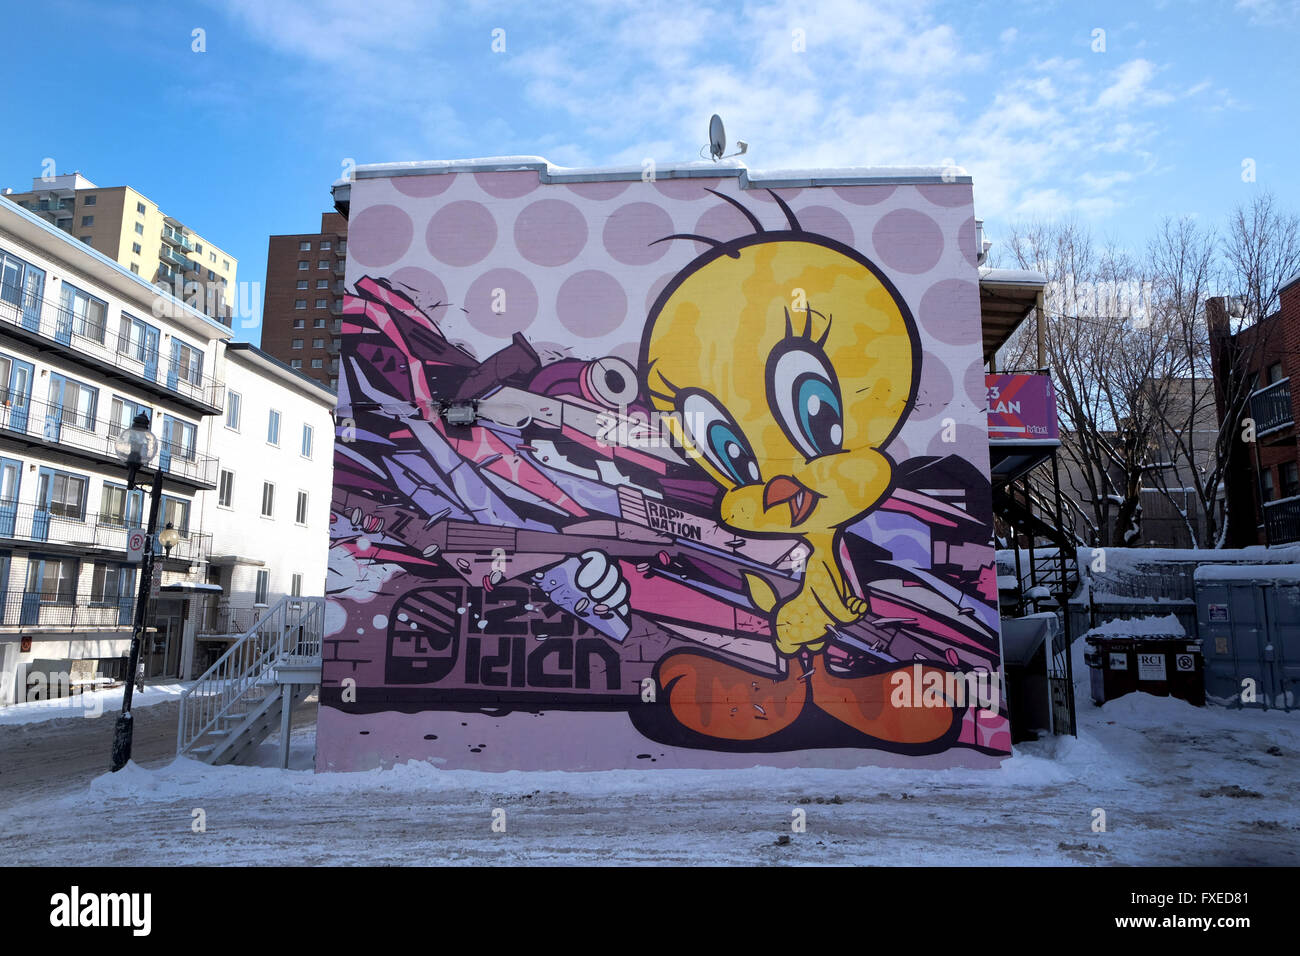 Street art or graffiti seen on the side of a building in Montreal in Canada. Stock Photo